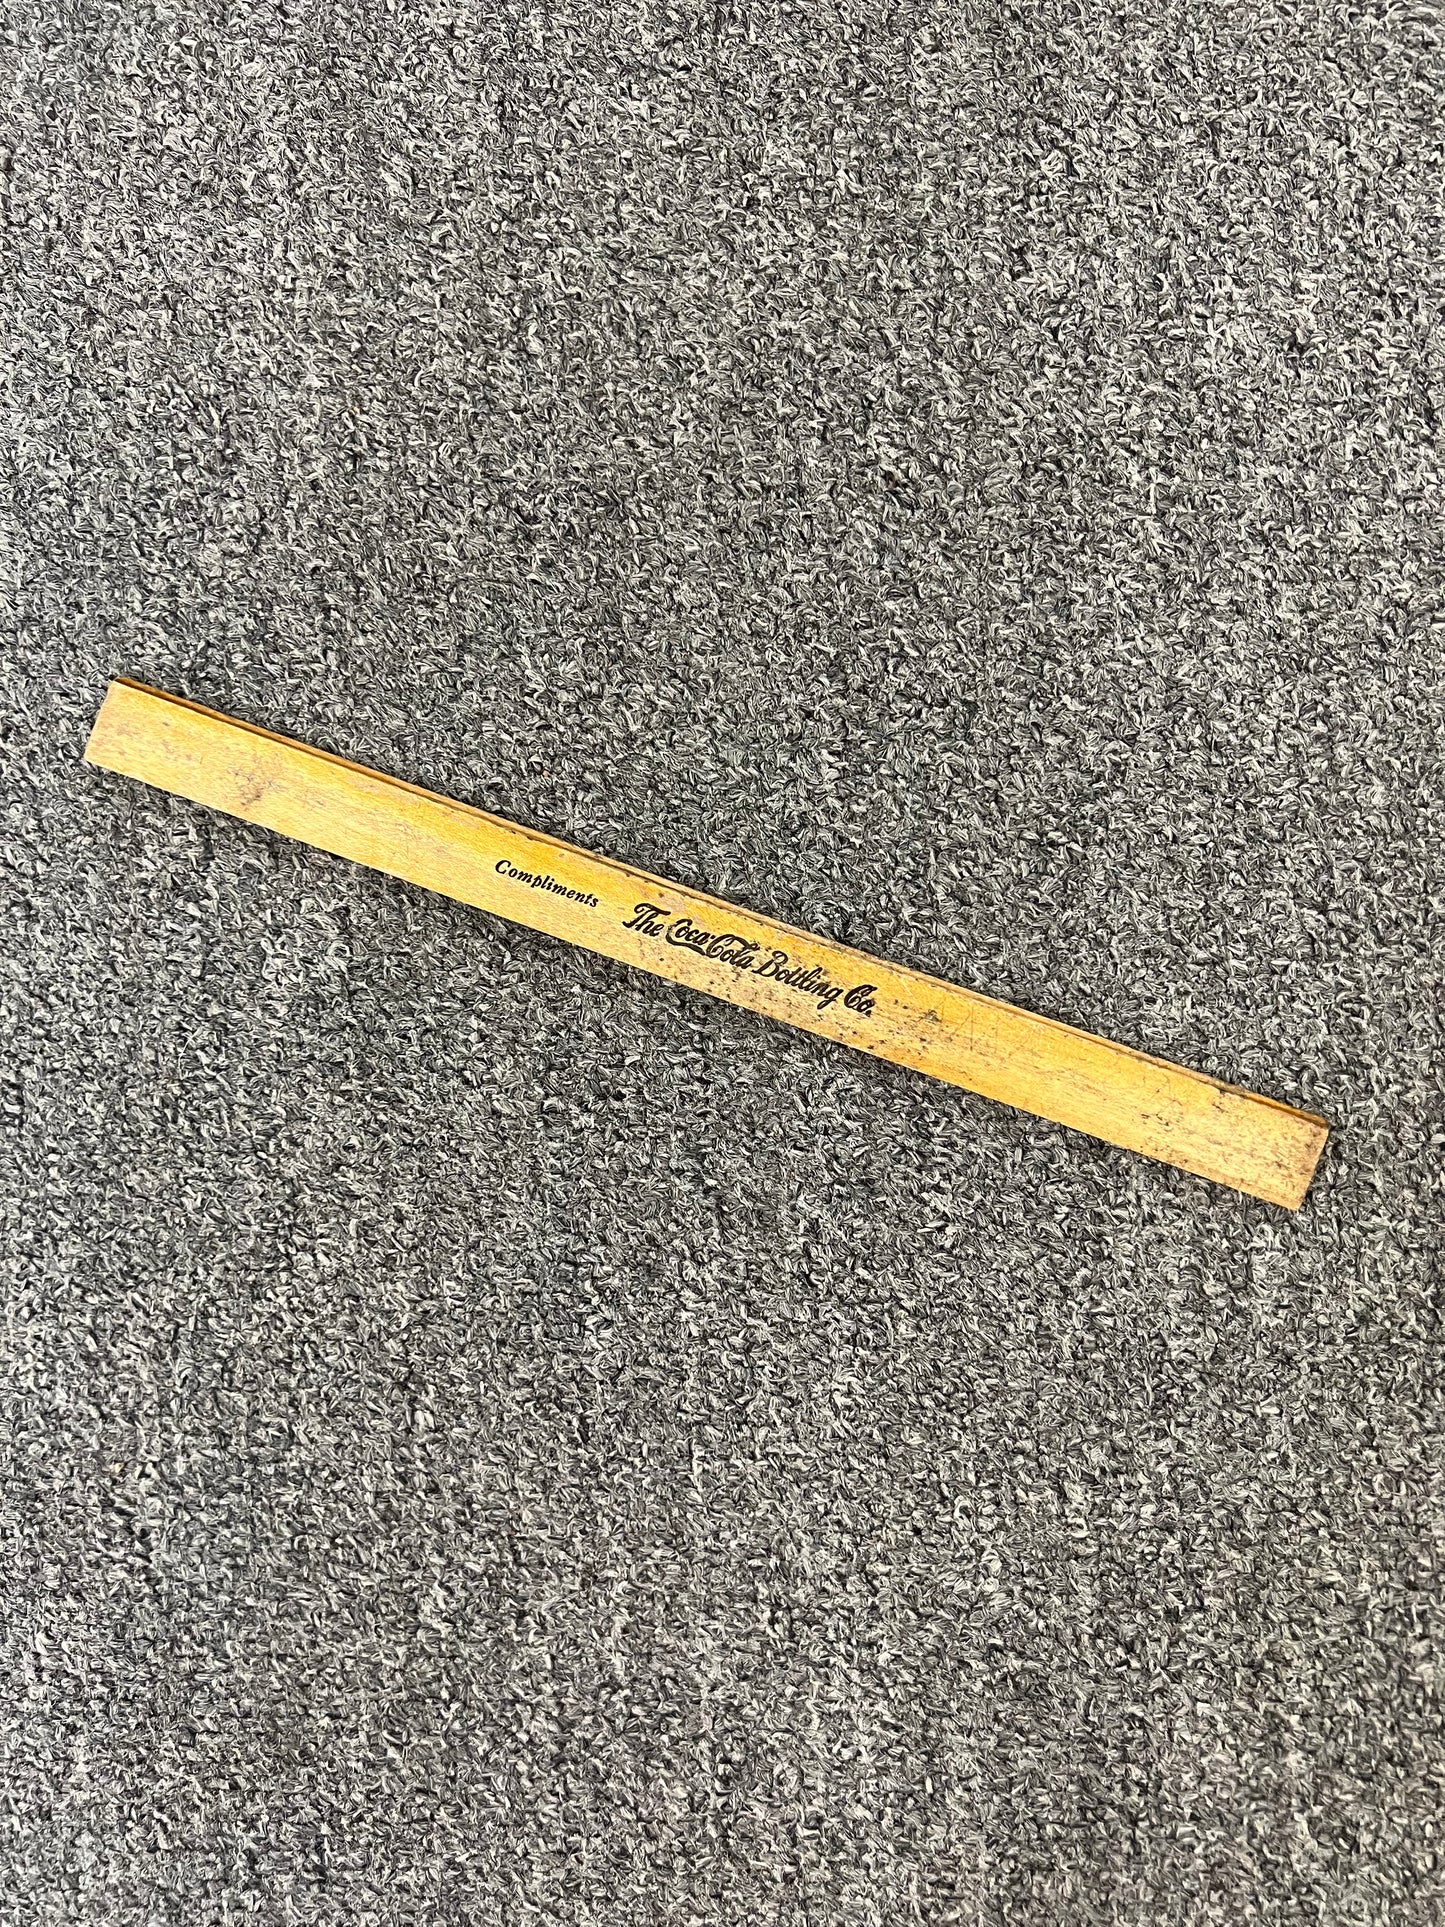 Vintage 1940s Coca Cola Wood Ruler Featuring the Golden Rule